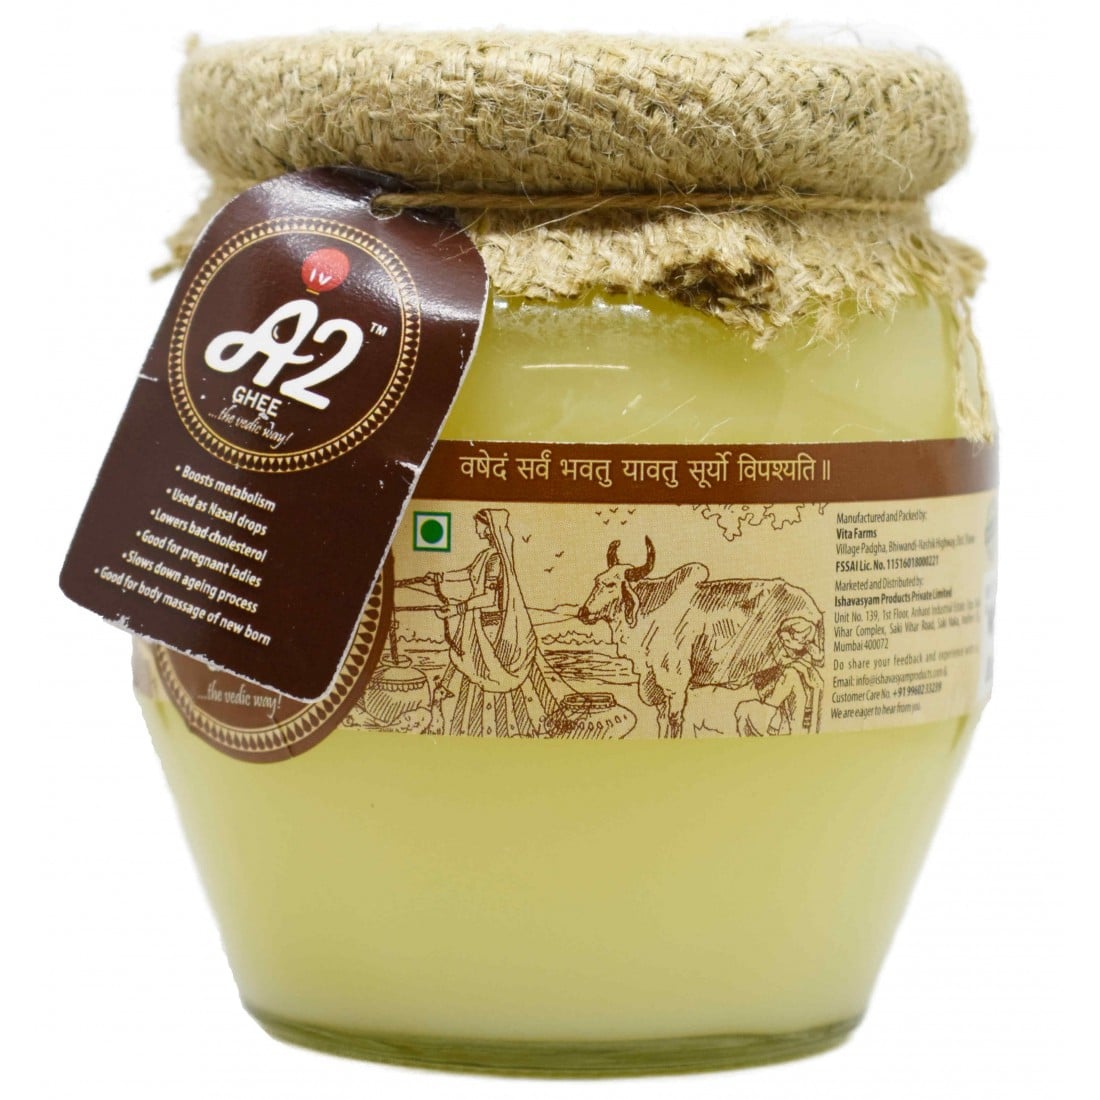 Vedic A2 Gir Cow Pure Ghee Online at Low Prices